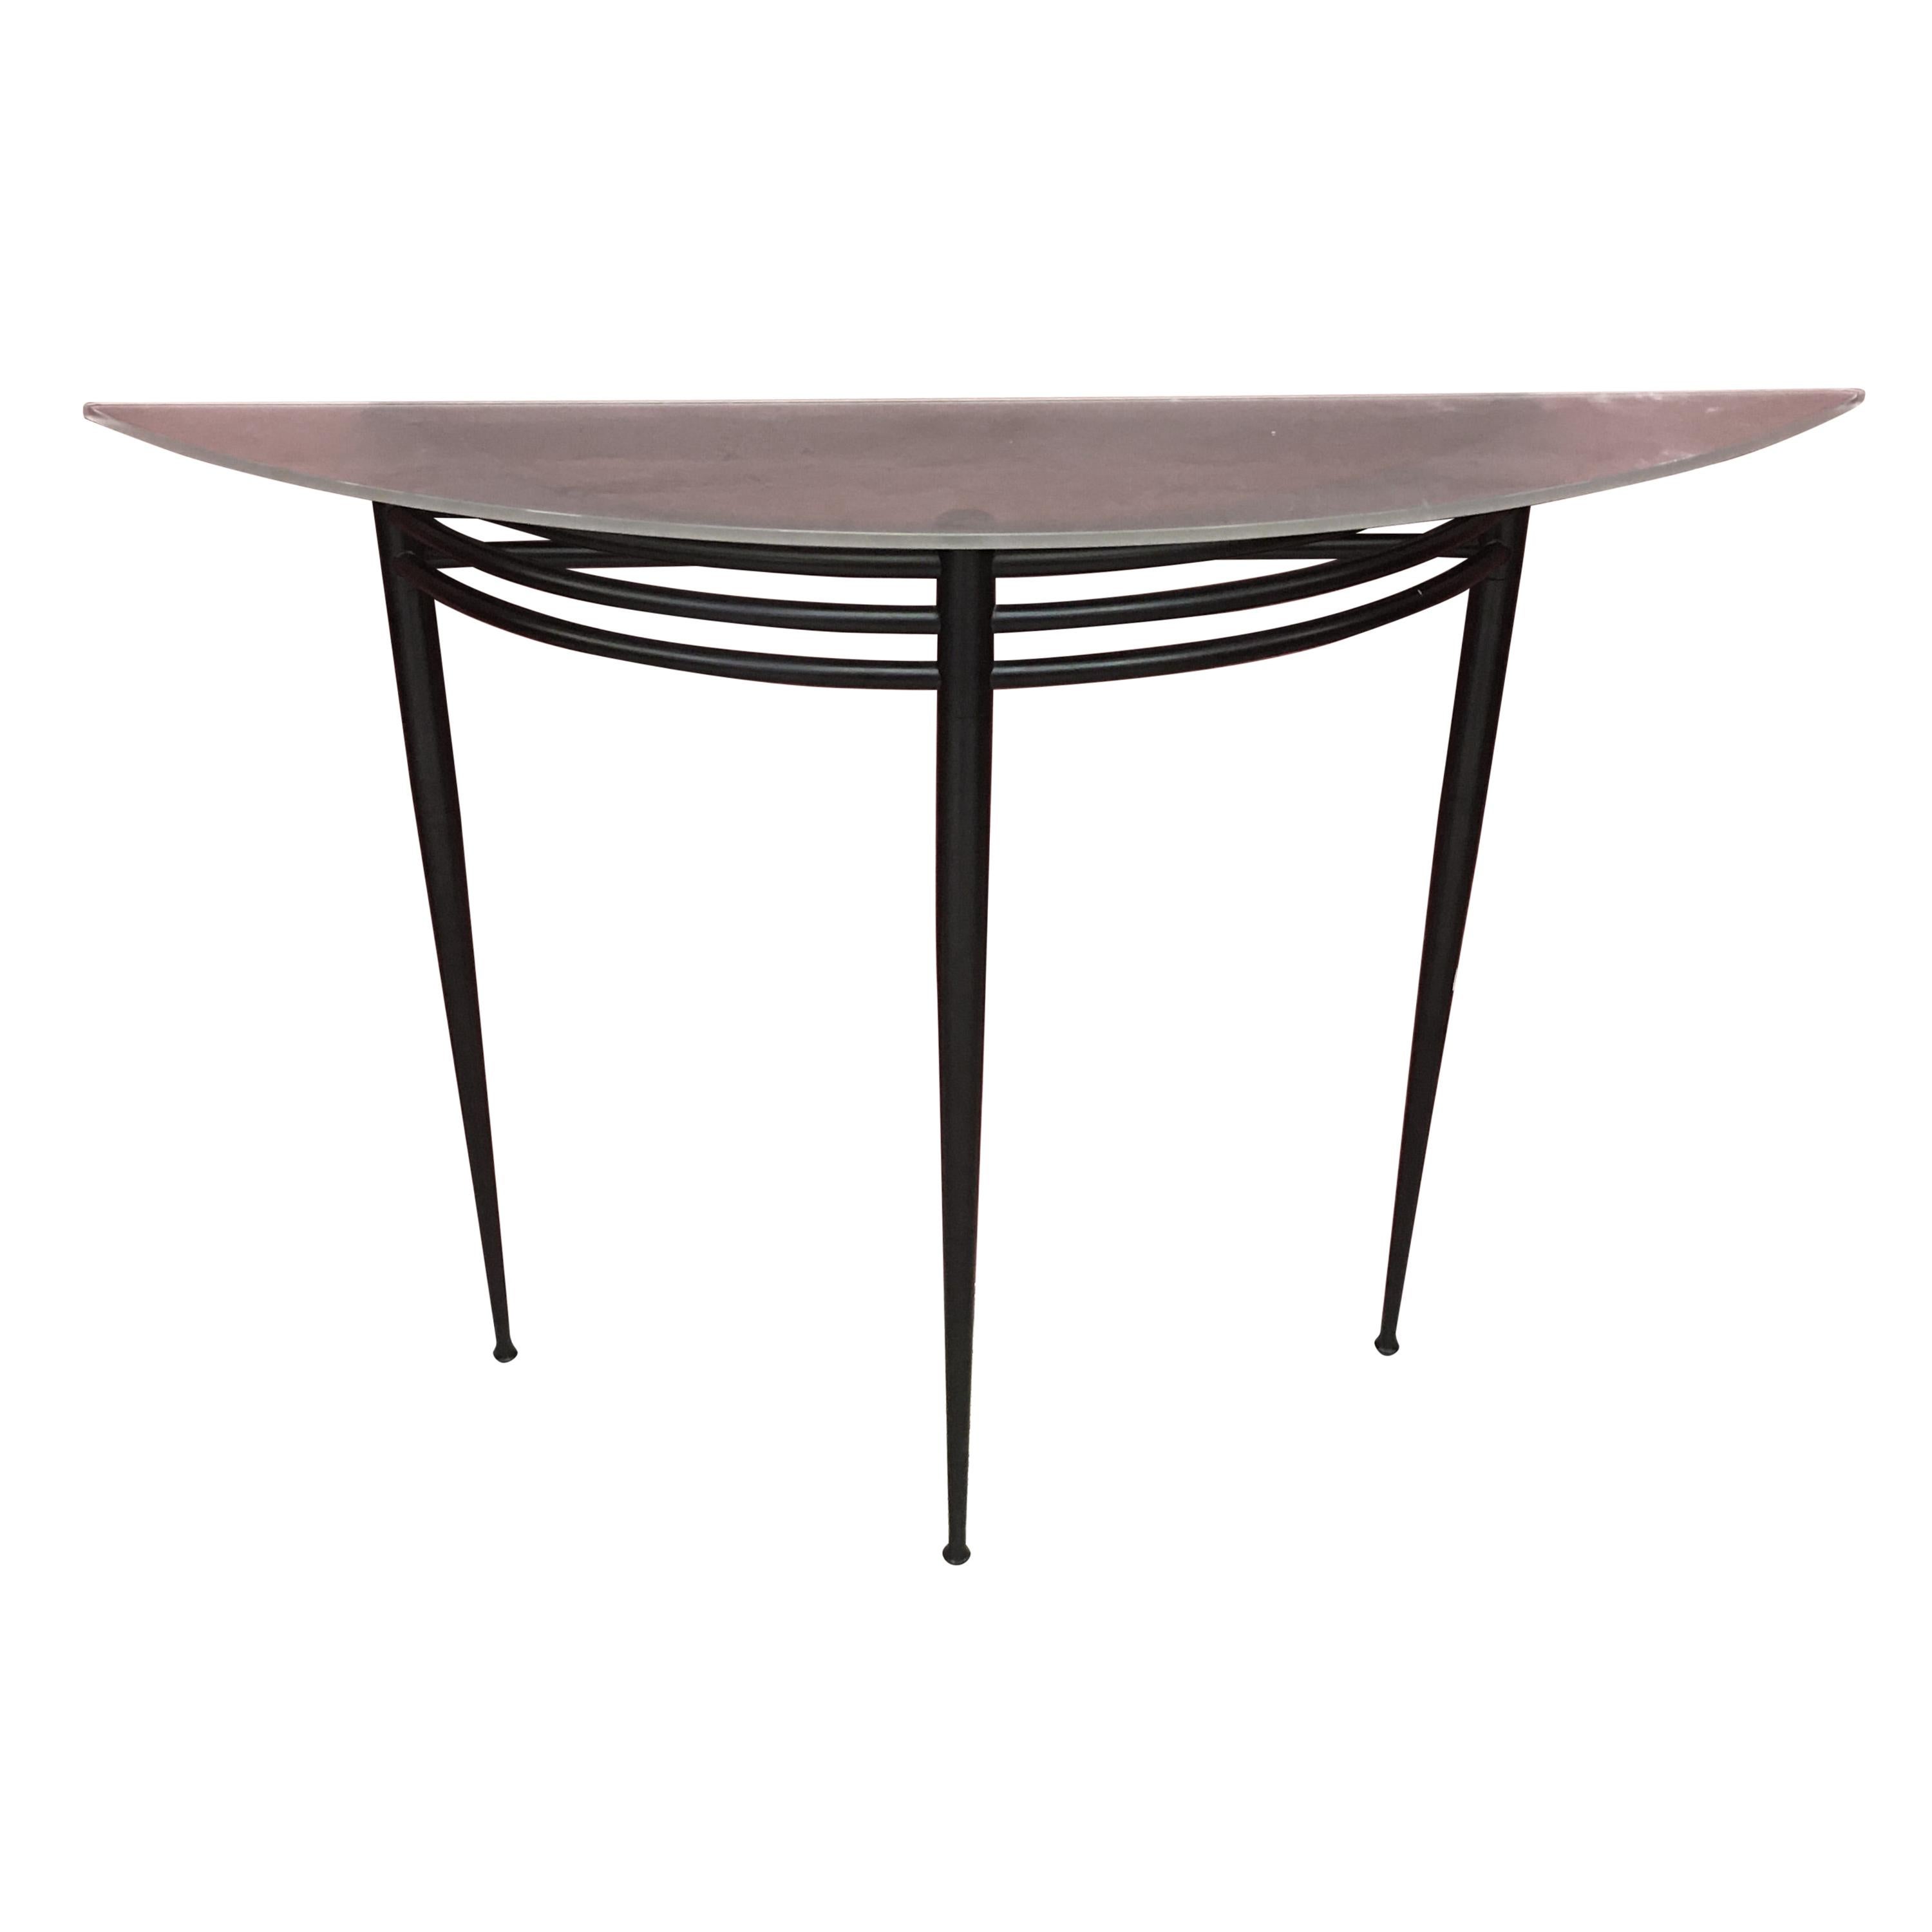 Pascal Mourgue, Lacquered Metal Console, Sanded Glass Top